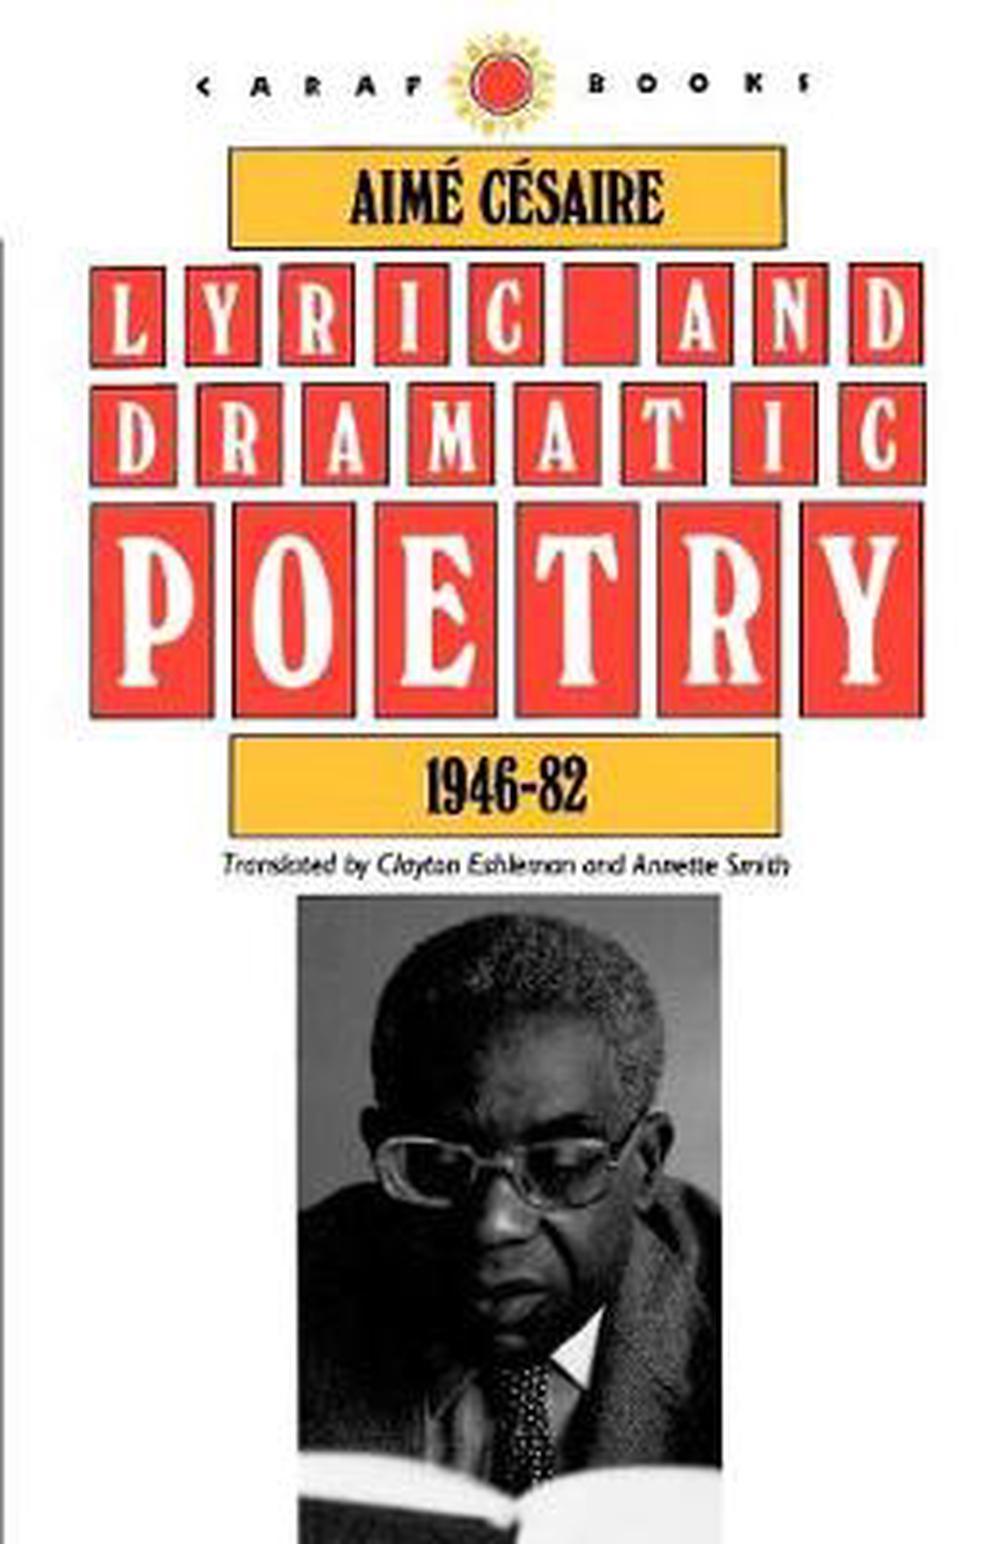 Lyric and Dramatic Poetry, 194682 by Aime Cesaire (English) Paperback Book Free 9780813912448